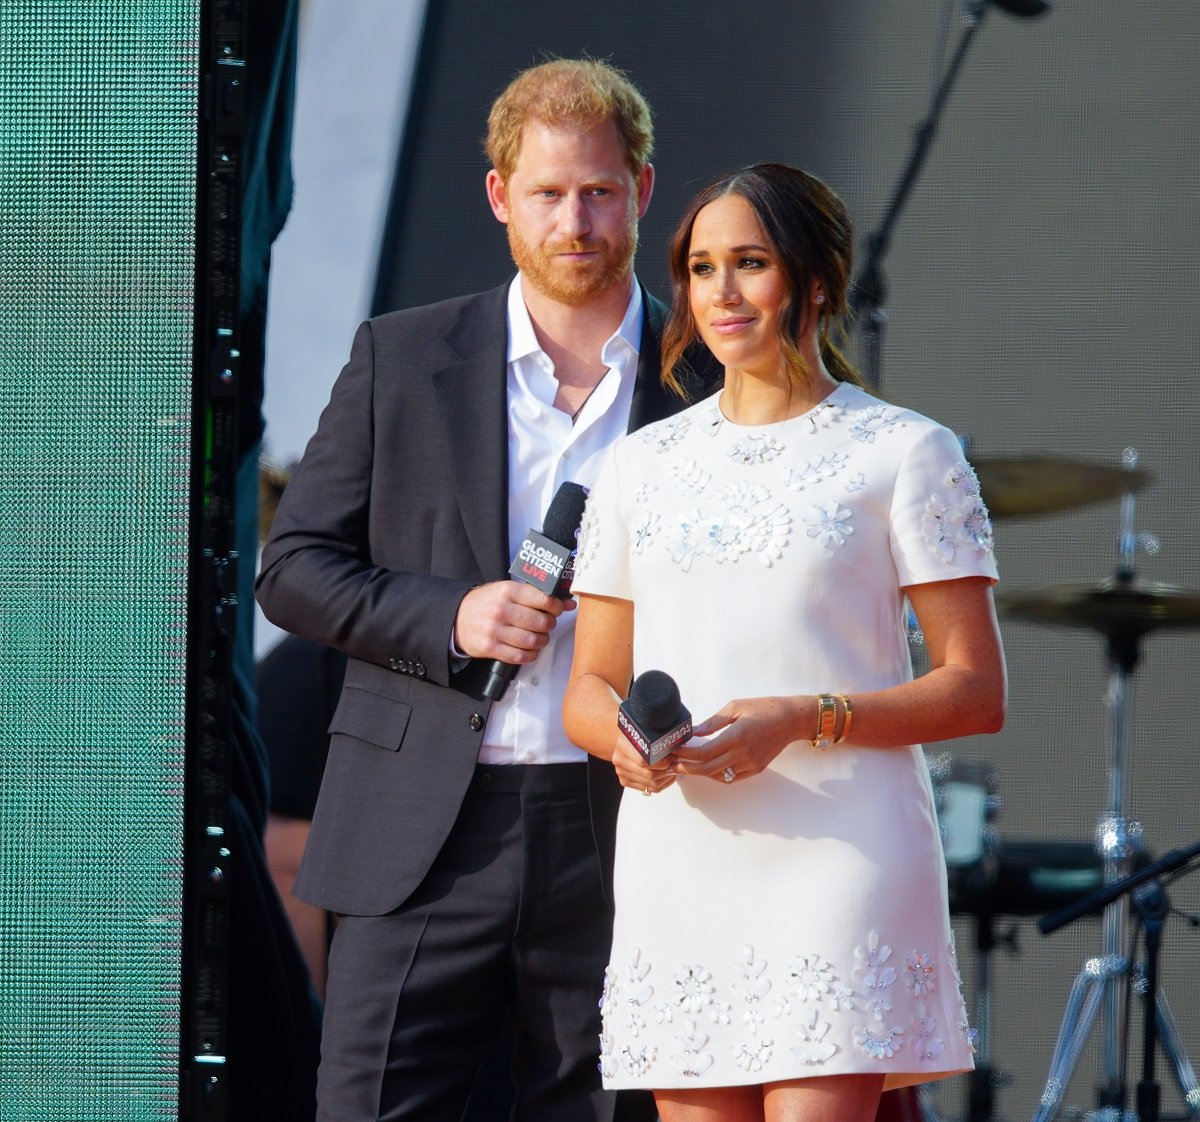 Prince Harry and Meghan Markle speaking on stage at Global Citizen Live in New York City